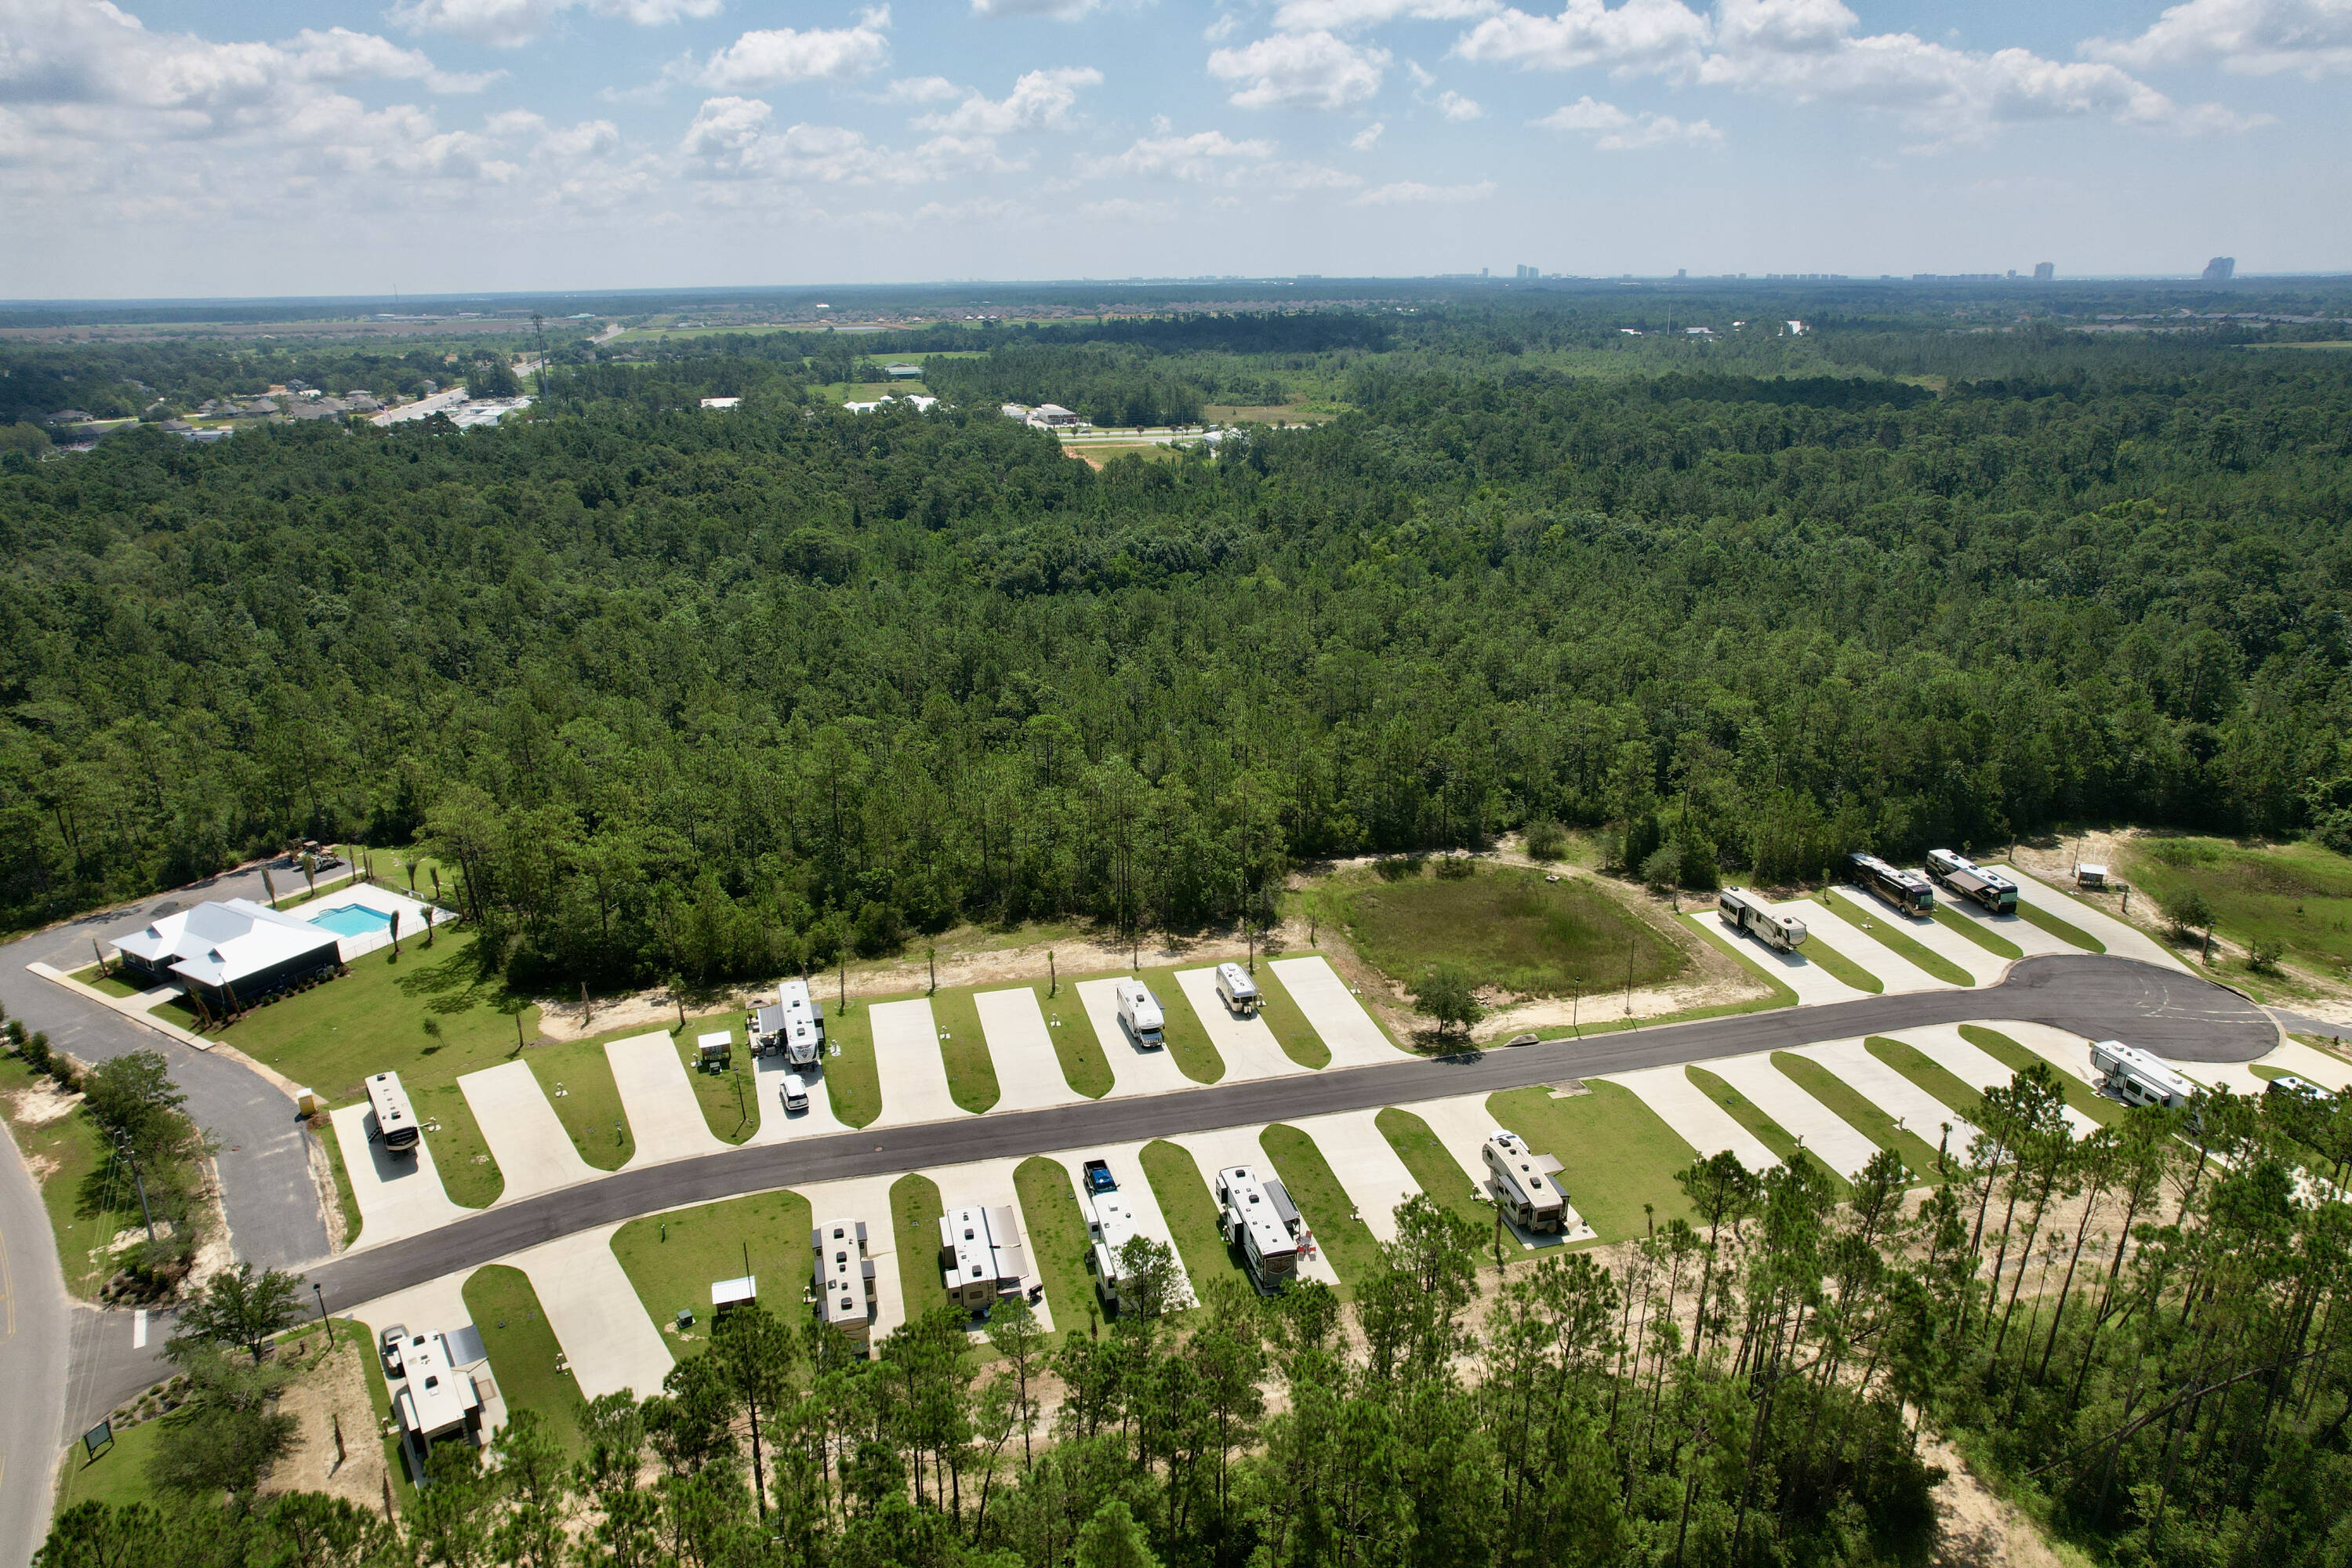 Aerial shot of an RV park with pool surrounded by tall trees.